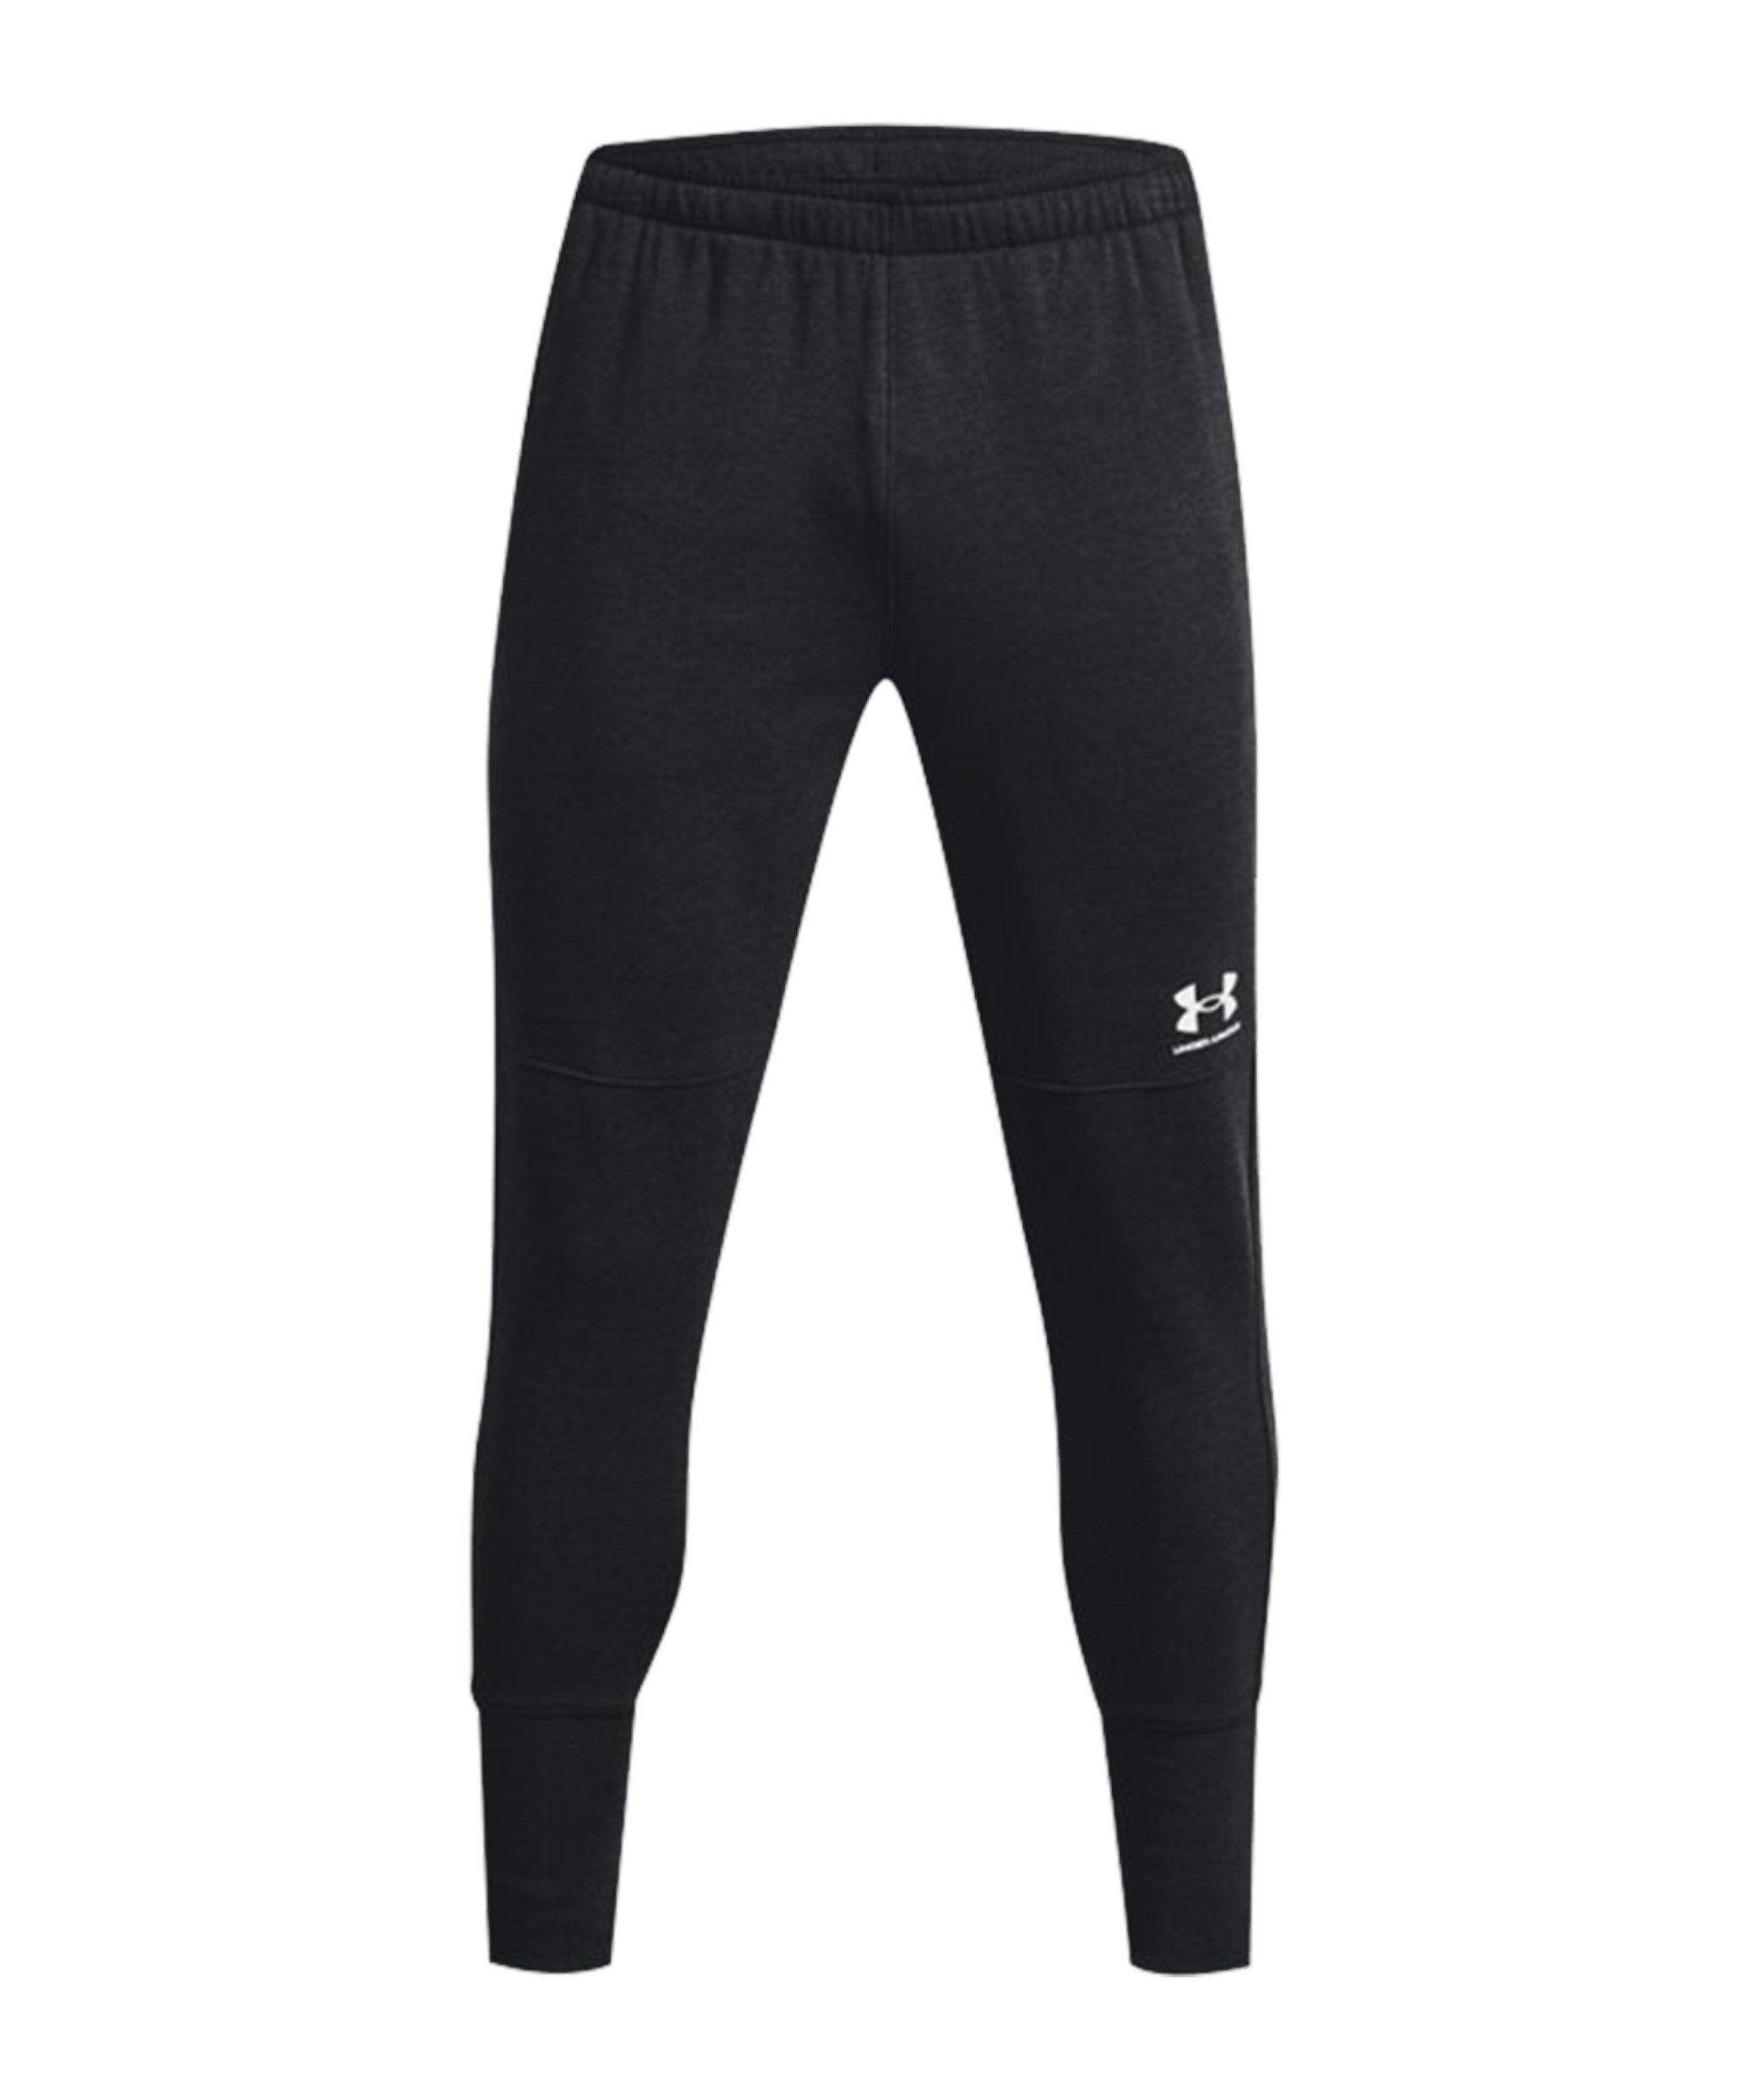 Under Armour® Sporthose »Acc. Off-Pitch Trainingshose« online kaufen | OTTO